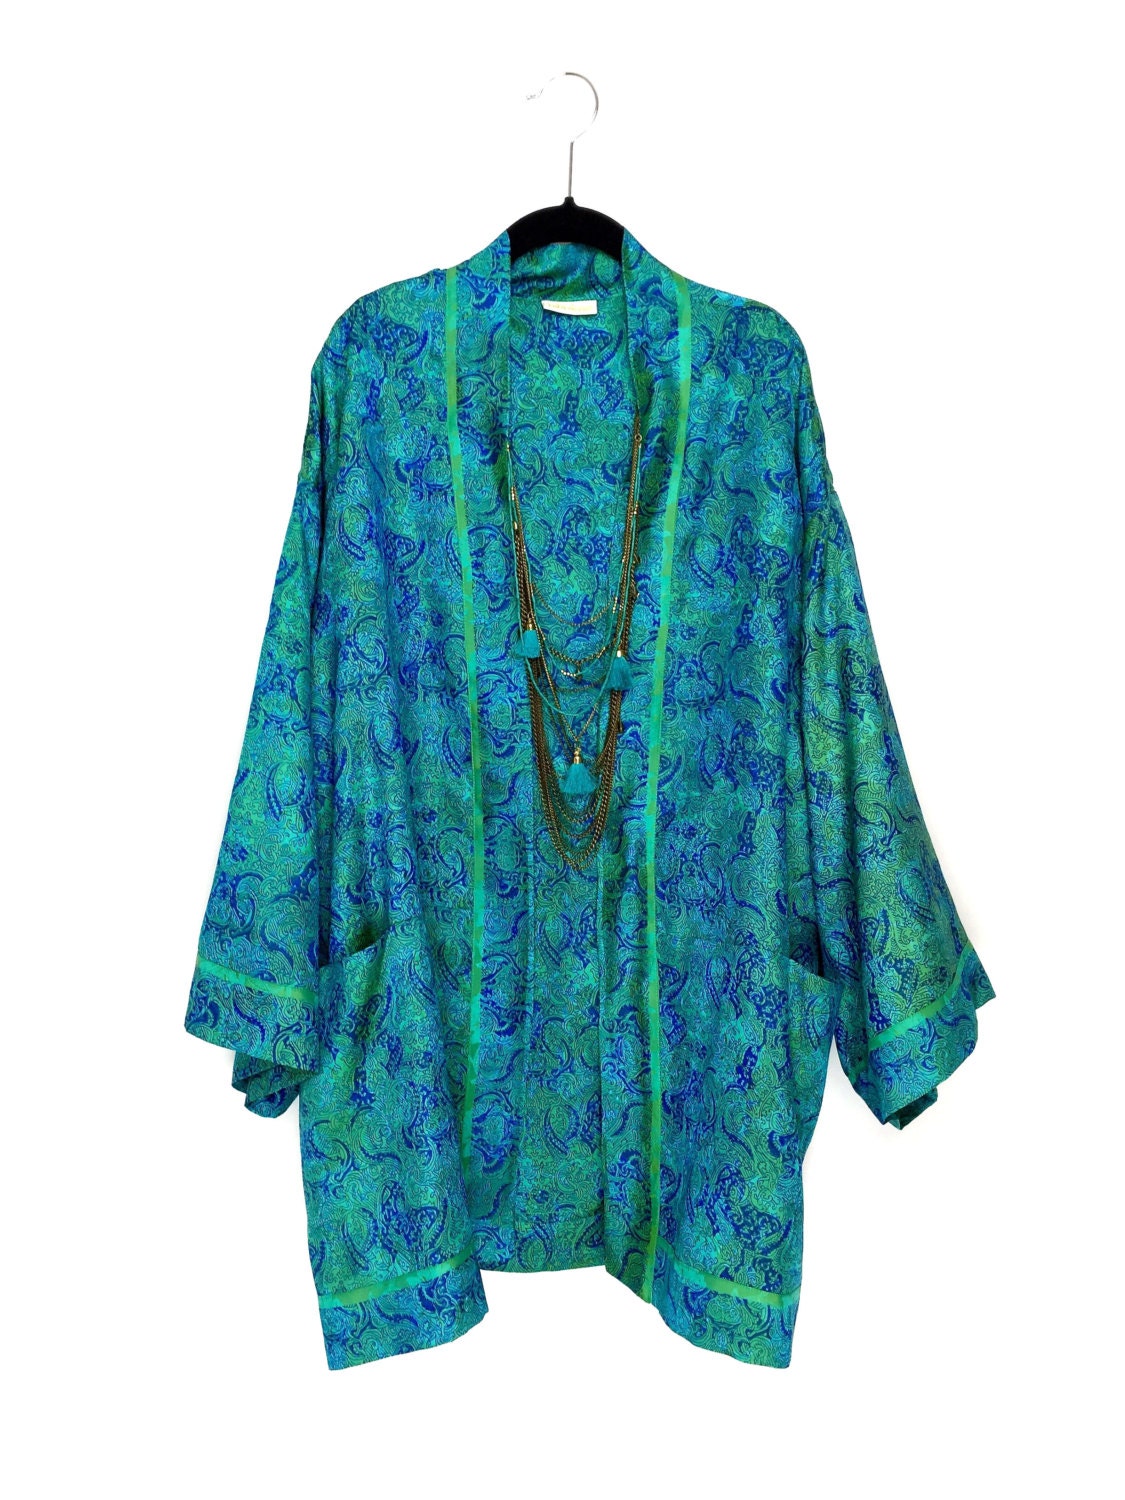 Silk Kimono fully lined jacket with an oversize fit in teal